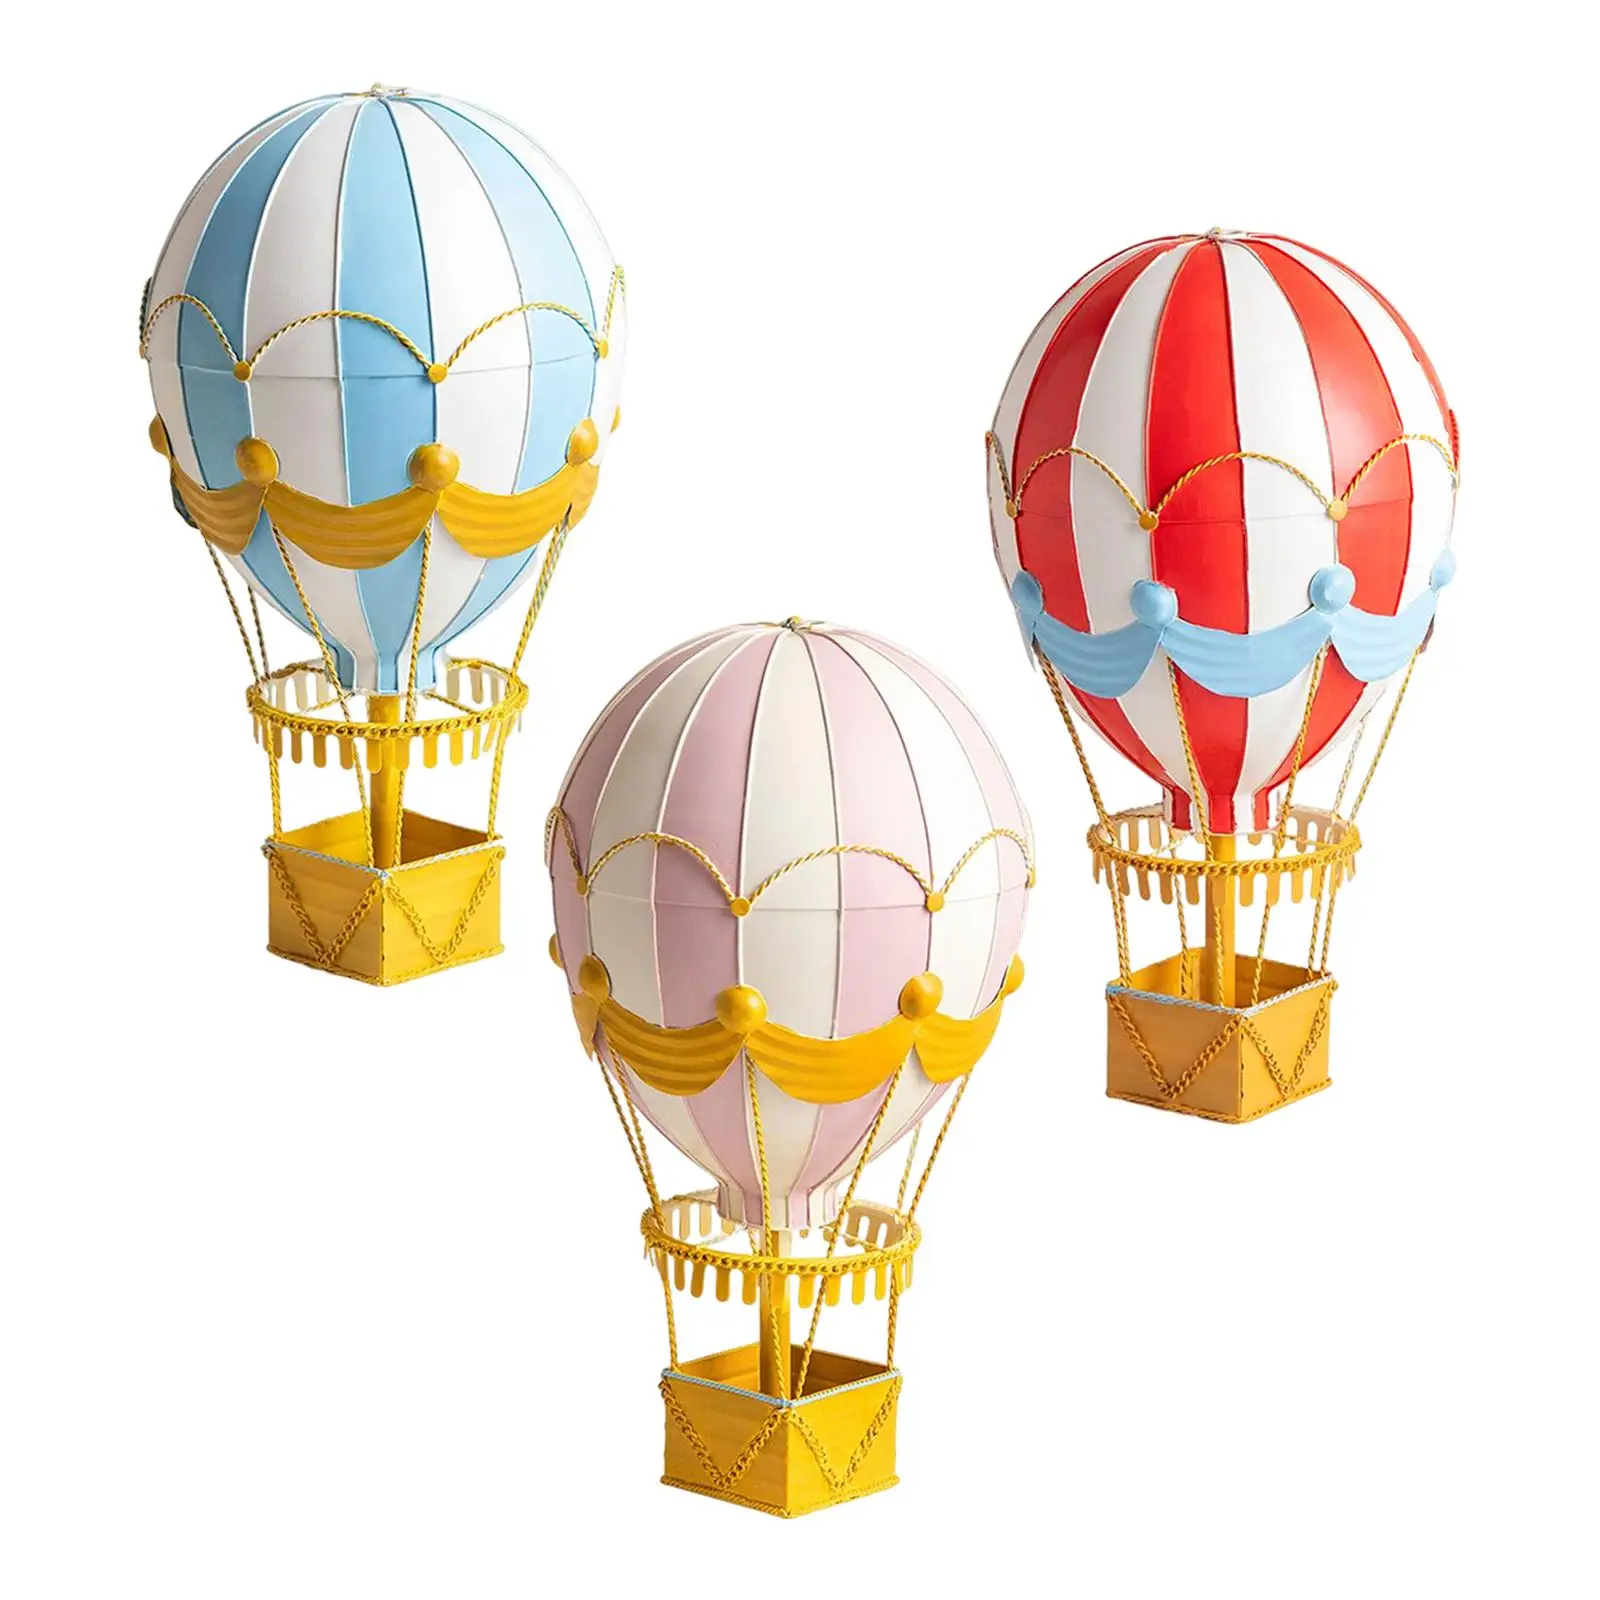 Novelty Hot Air Balloon Collection Ornament Hanging Crafts Creative for Home Desktop Office Table Centerpiece Decoration